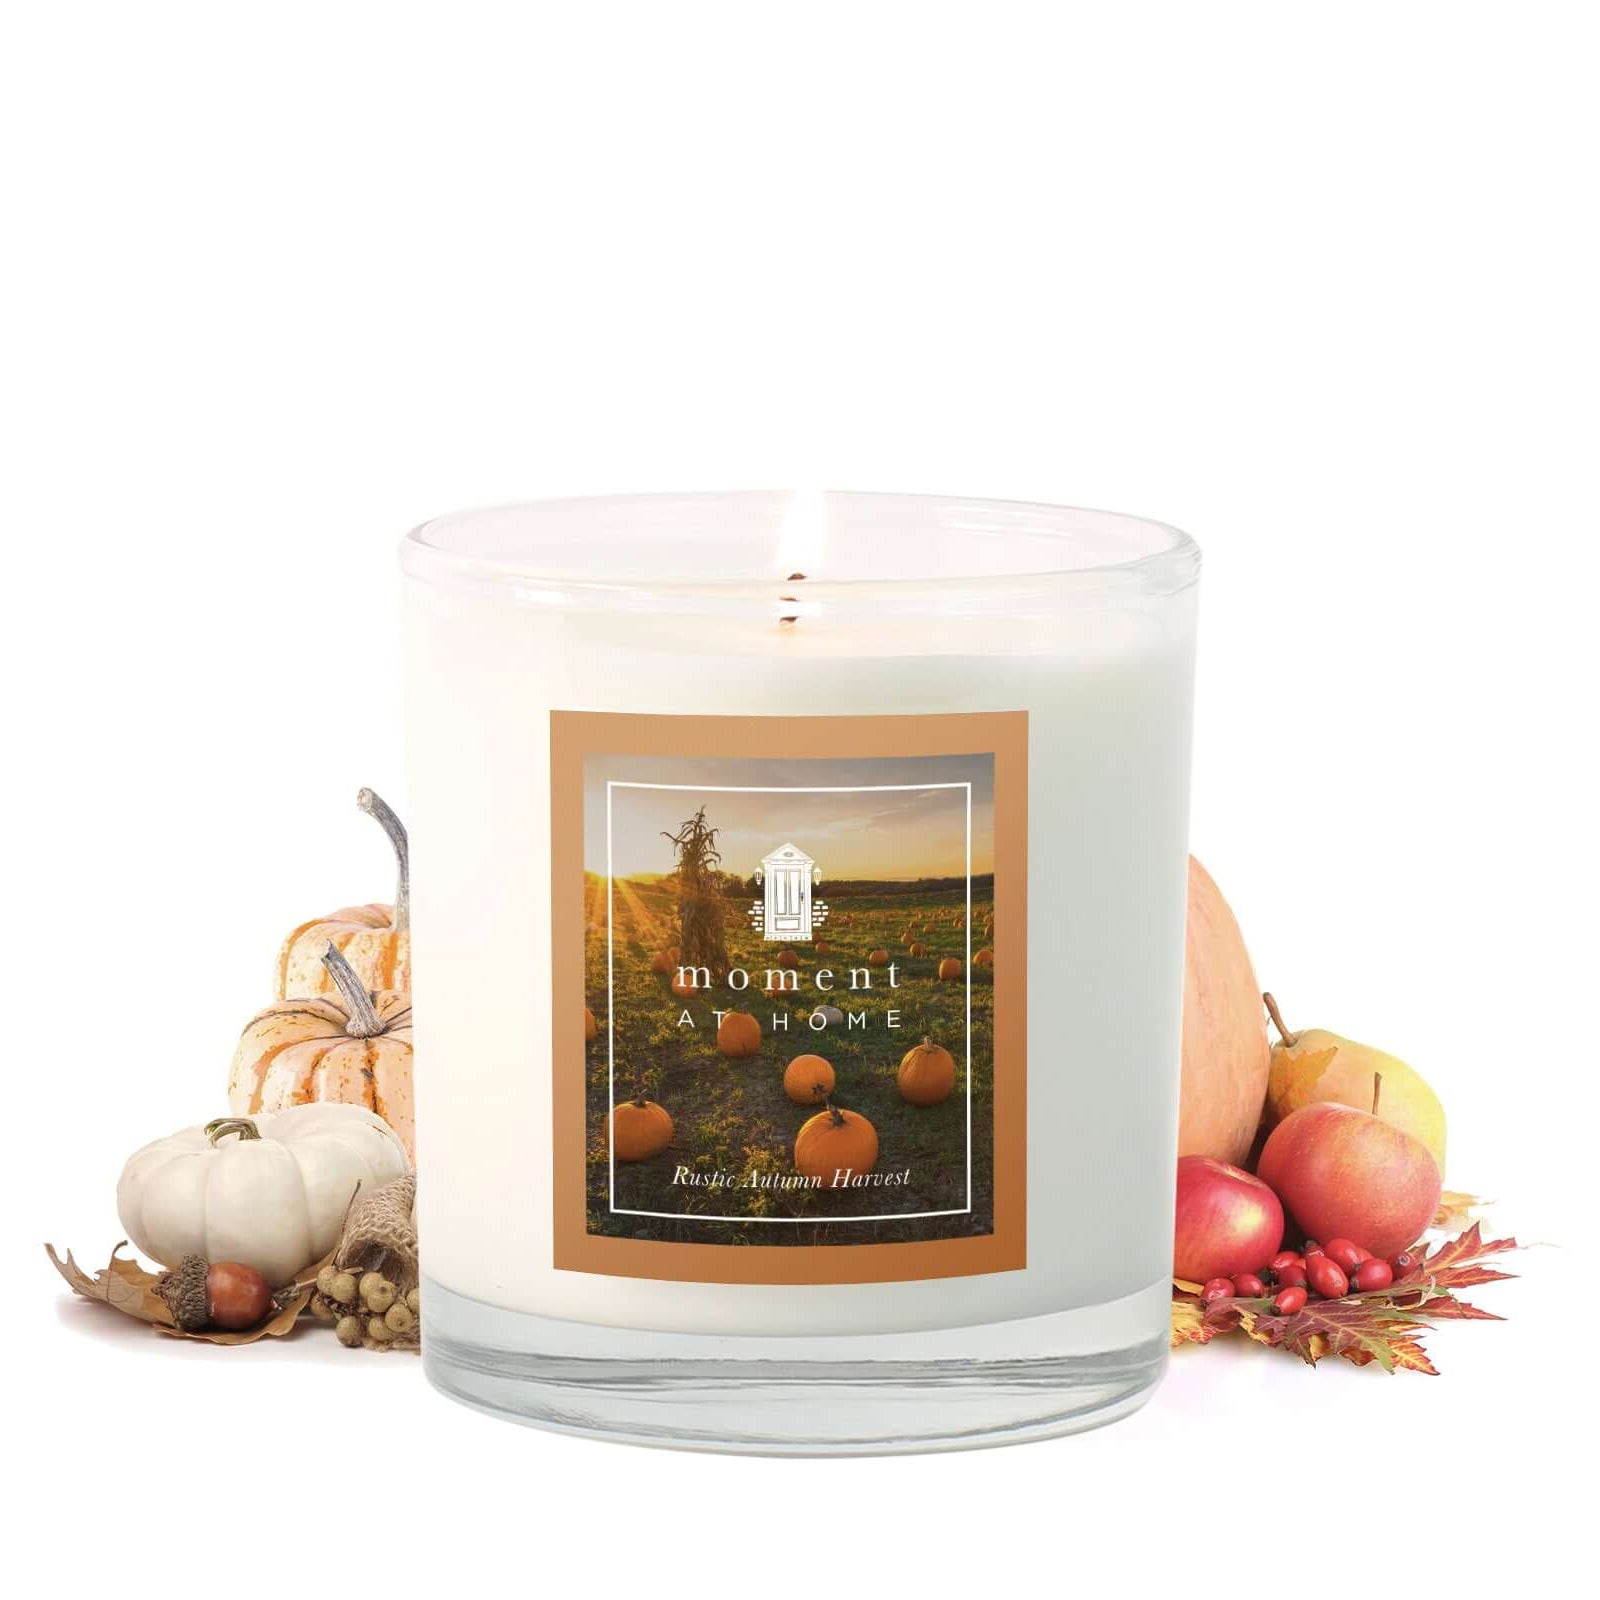 Rustic Autumn Harvest. Best fall scented candle. 